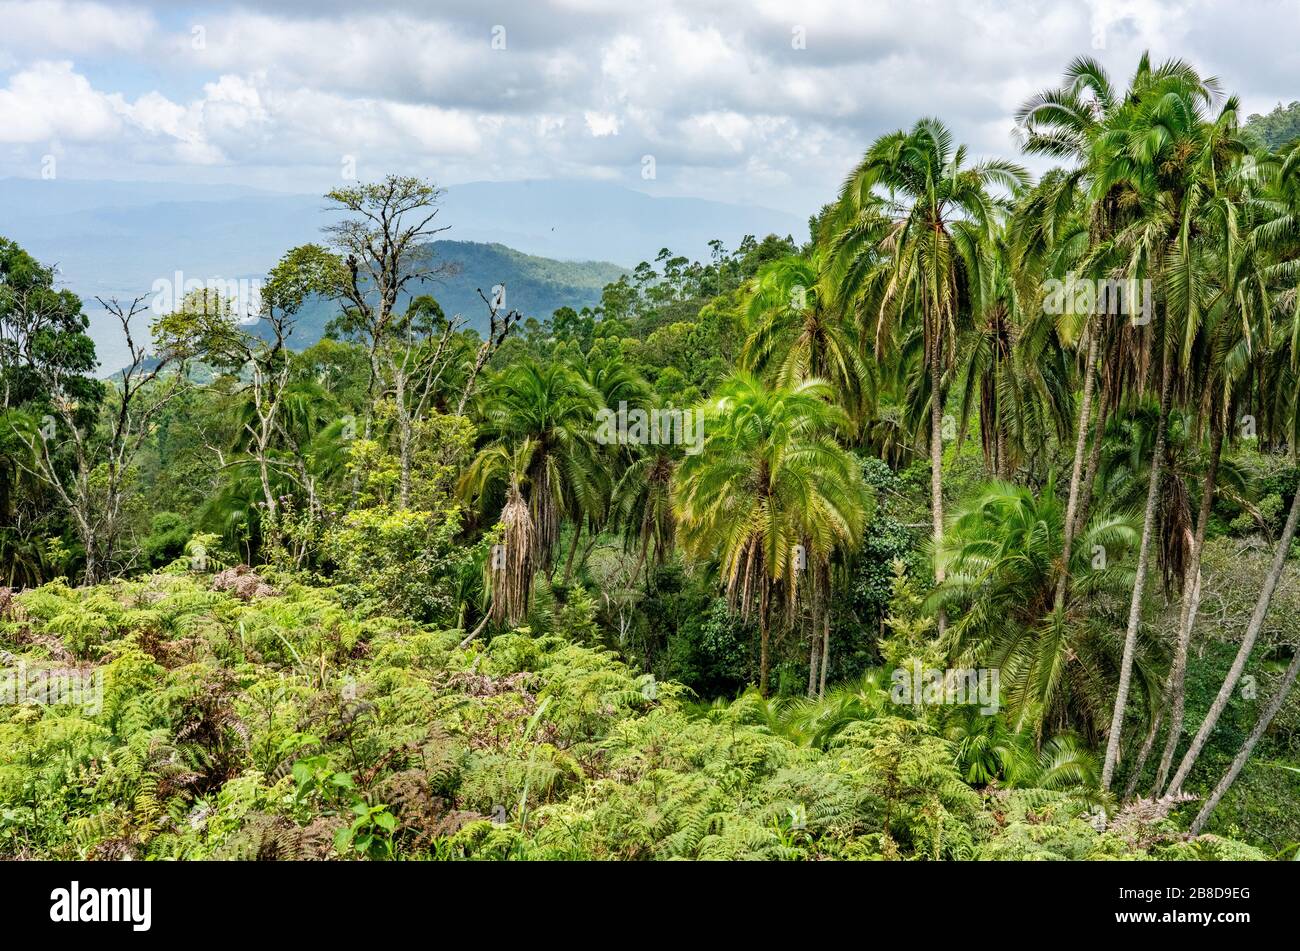 Lush tropical vegetation high in the Sagalla Hills of Southern Kenya near the town of Voi Stock Photo